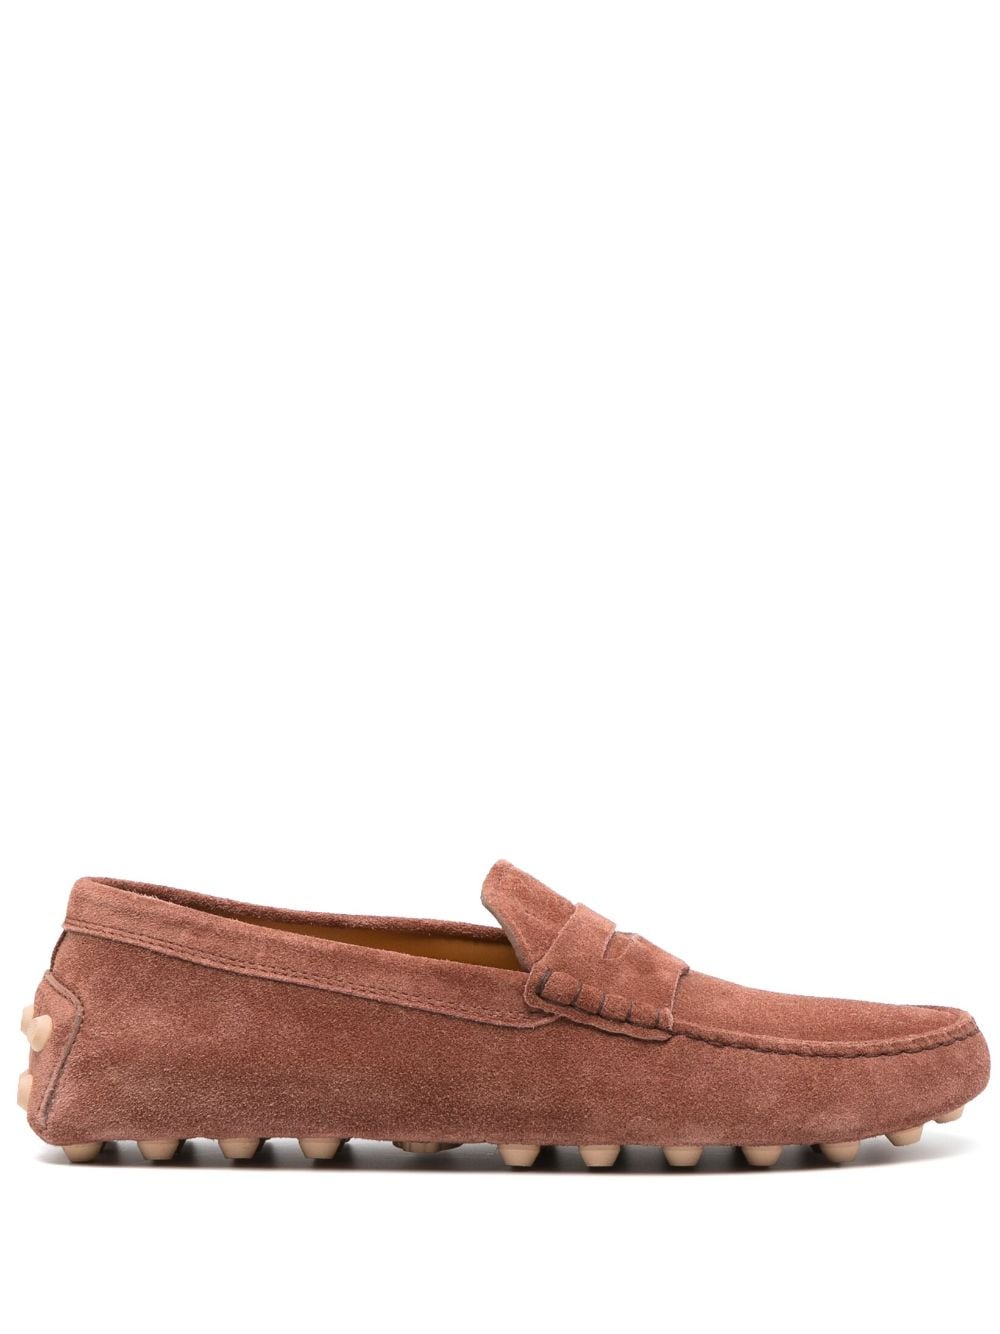 Tod's Gommino suede driving shoes - Brown von Tod's